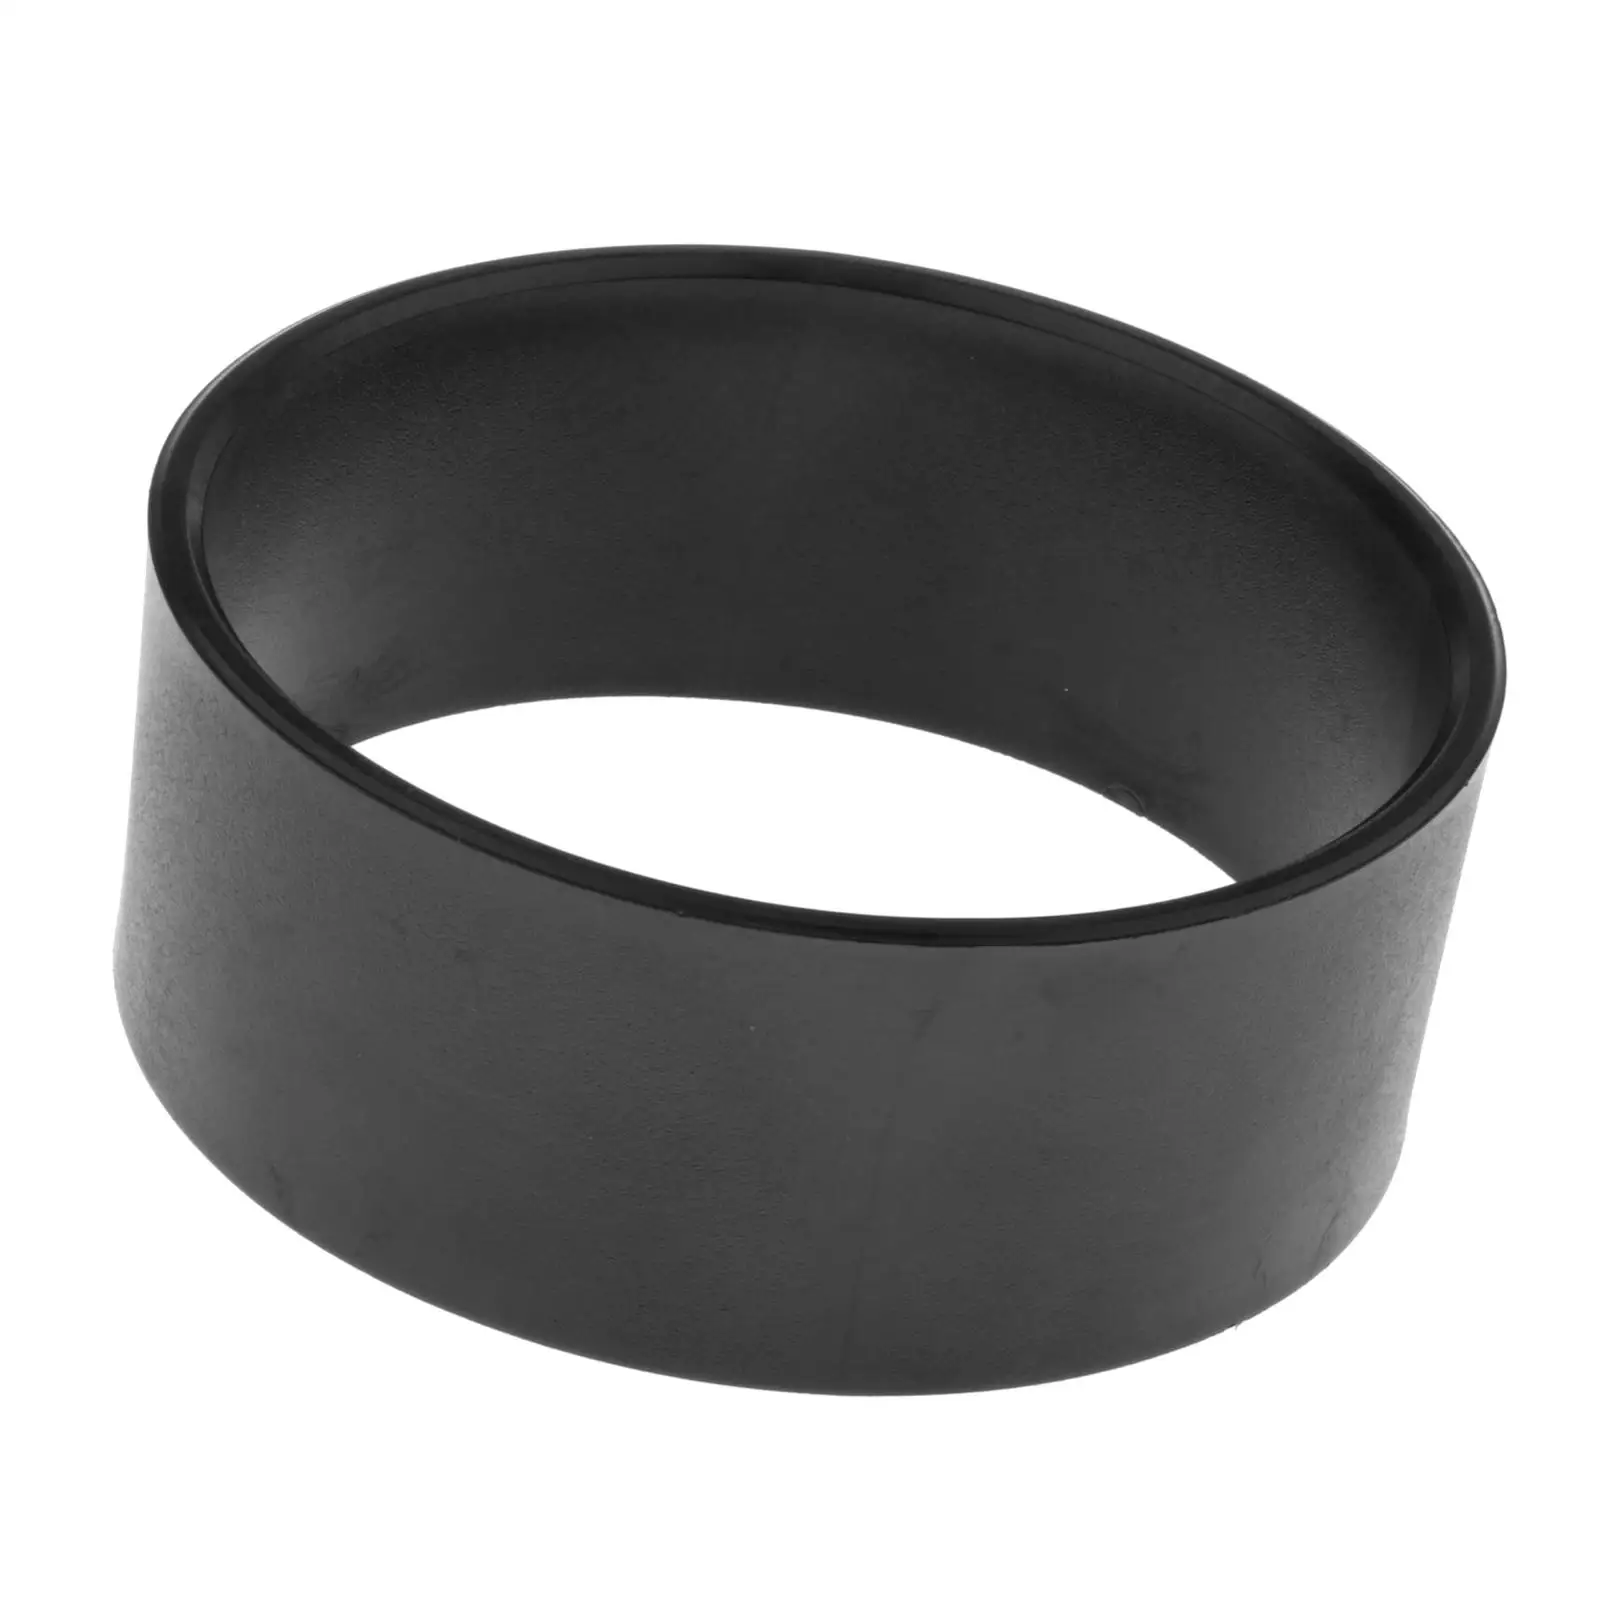 Wear Ring 155mm 271000653 for Sea Doo GSX GTX RX 3D GTI Accessories,Durable Material